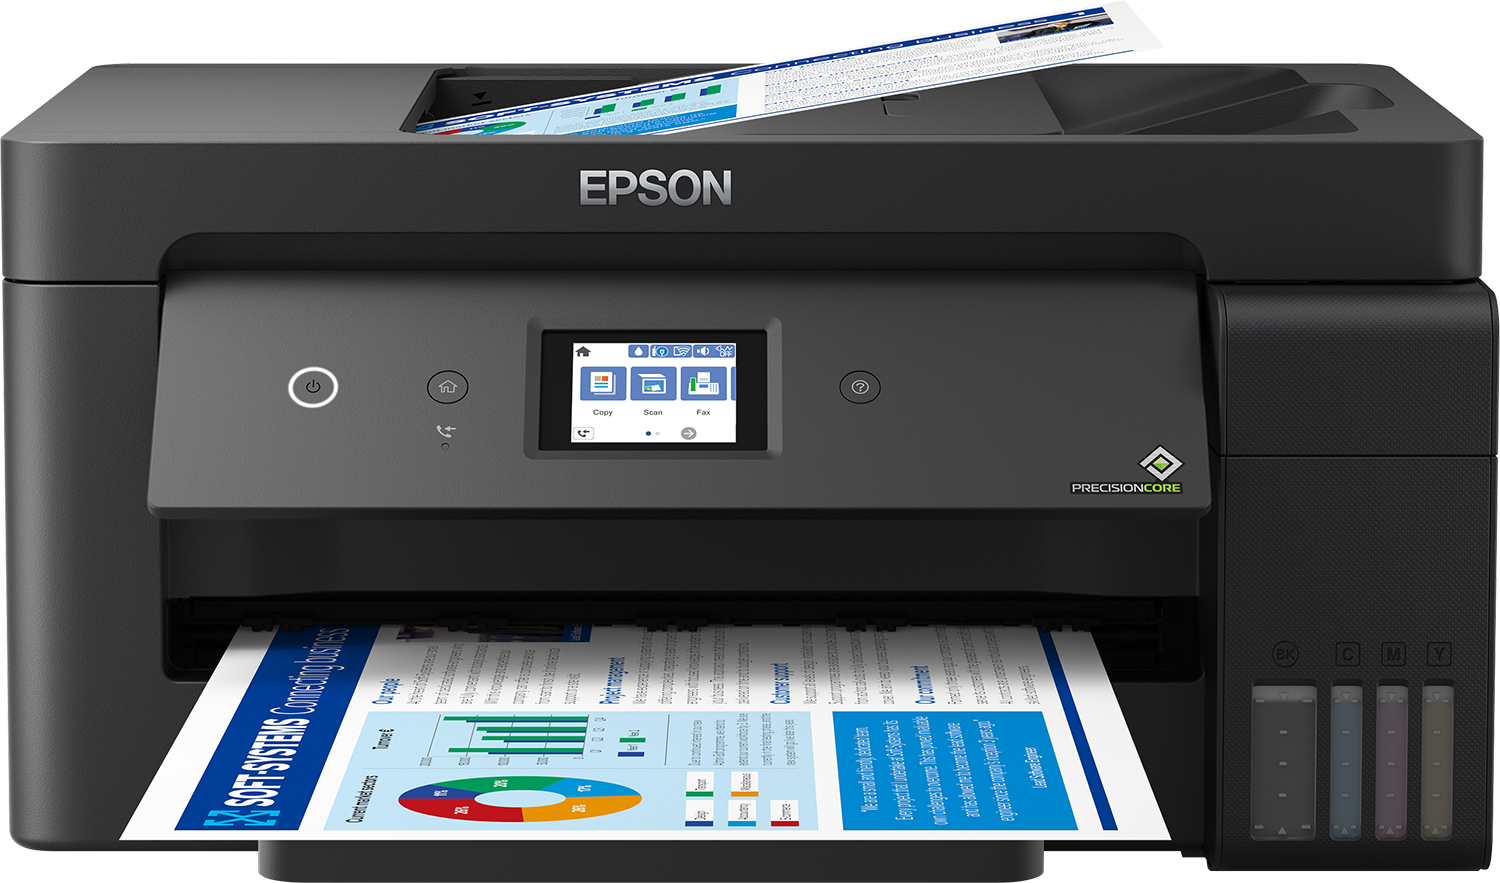 Step-by-step Driver Epson Printer ET-15000 Kali Linux Installation - Featured